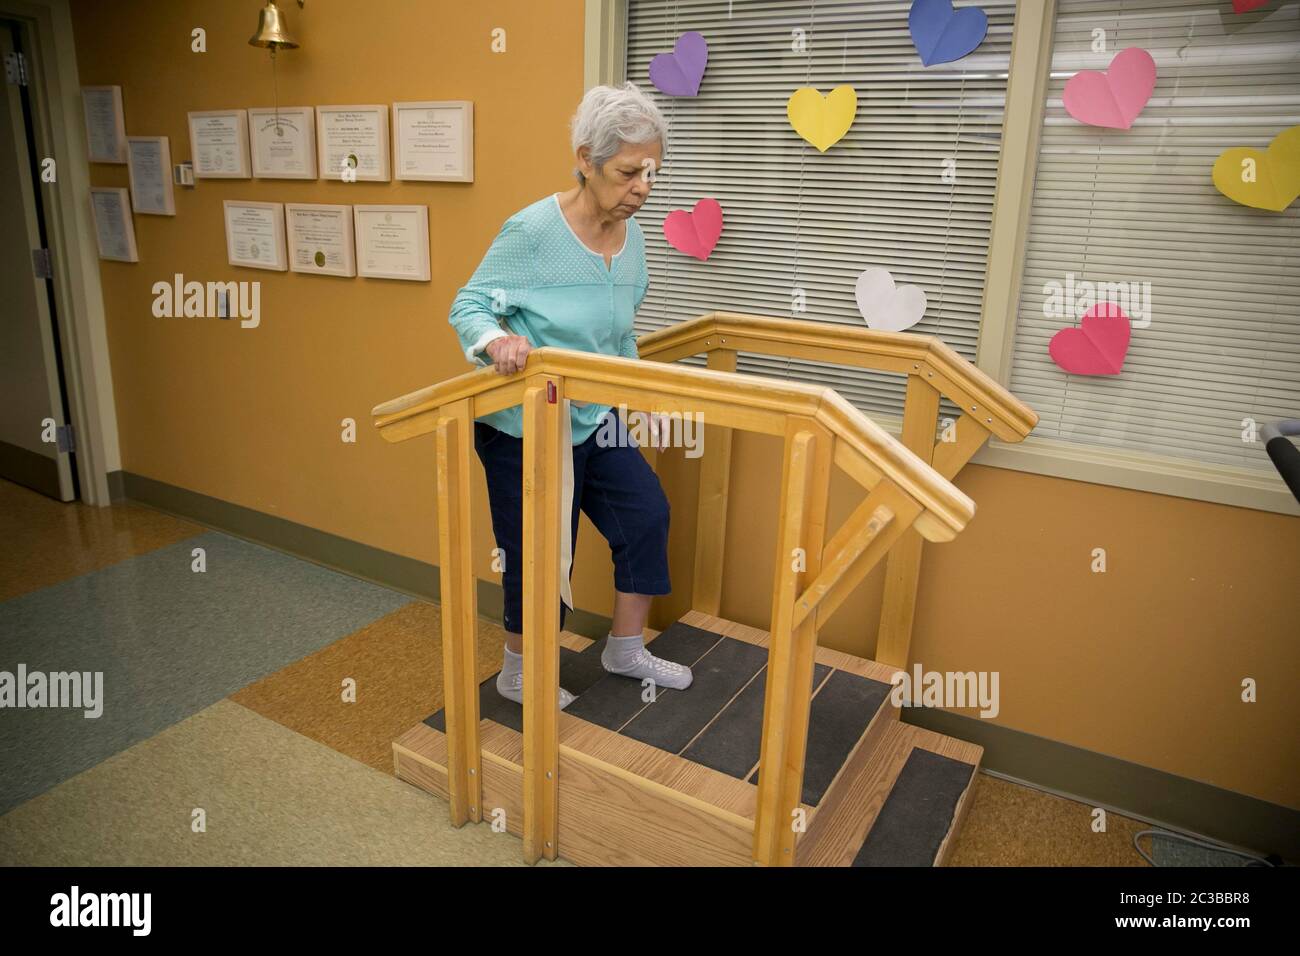 Austin Texas USA, February 11 2014: 75-year-old female Hispanic patient does physical therapy exercise while in a rehabilitation hospital. ©Marjorie Kamys Cotera/Daemmrich Photography Stock Photo